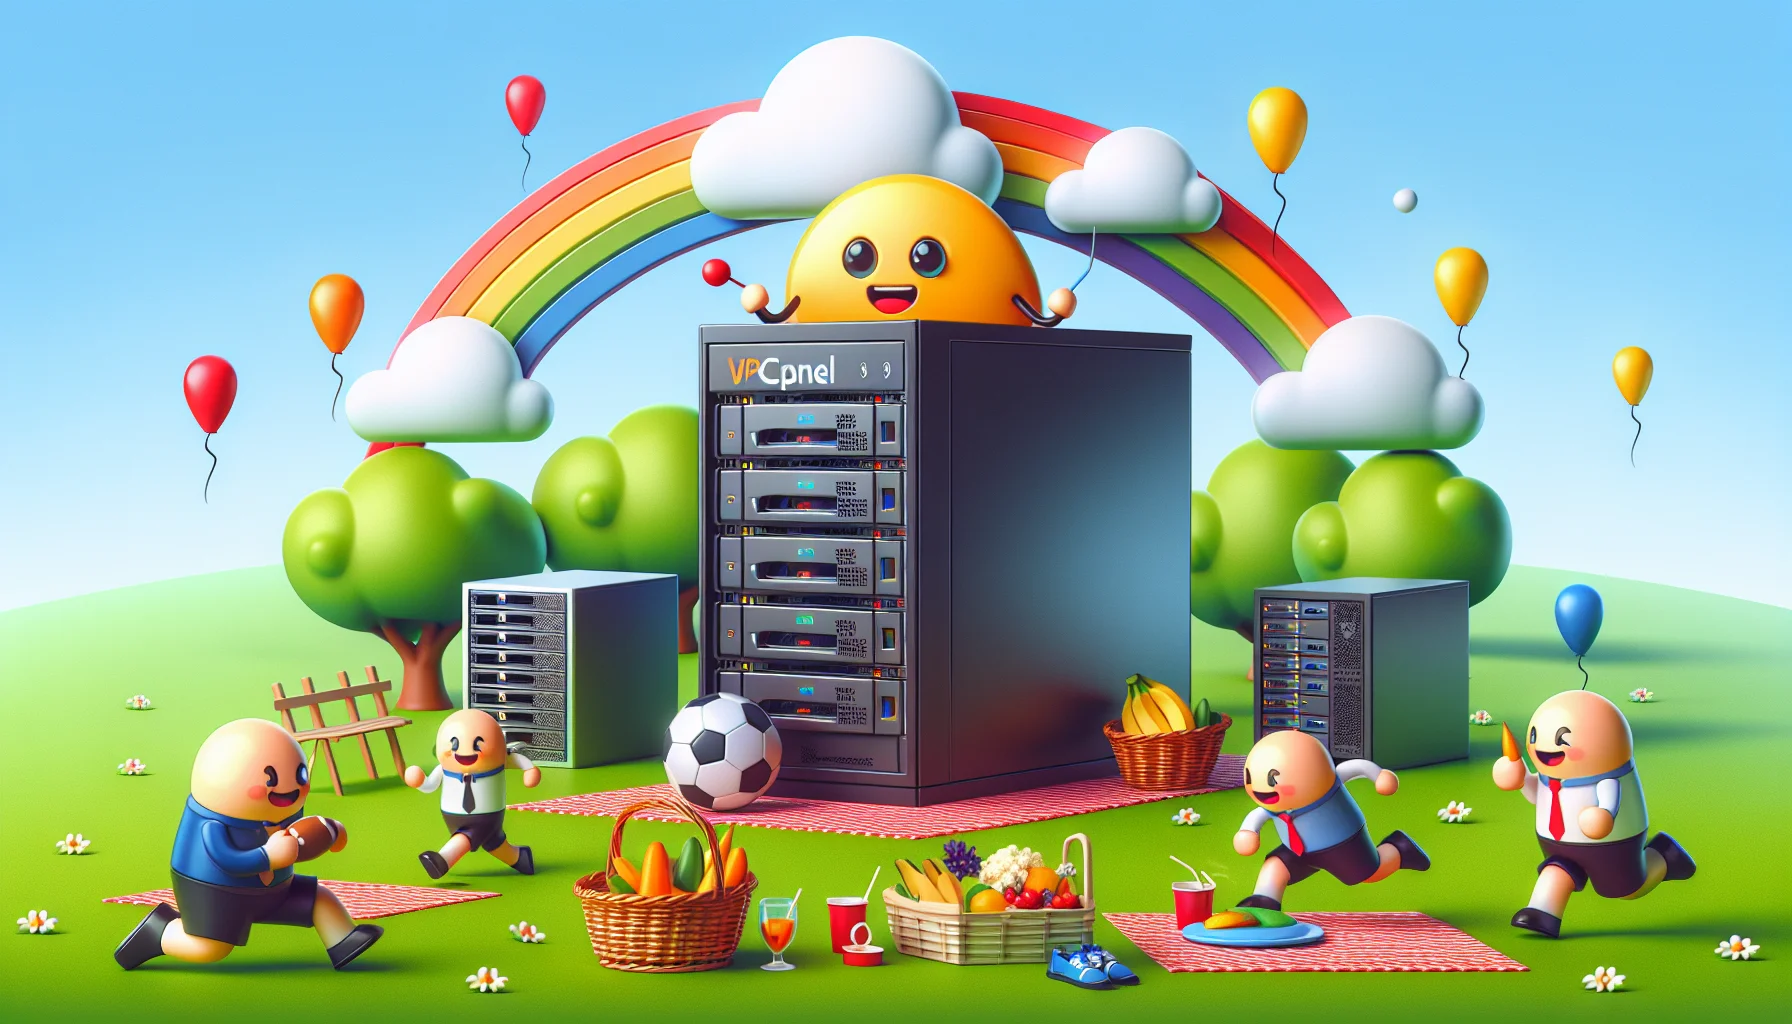 Create a humorous, realistic image showcasing a visual representation of a typical VPS cPanel. Imagine it in a comical situation, as if it's a cartoon character having a picnic. Alongside it, show several web hosting related objects like servers and cloud icons engaging in fun activities, for instance playing football or having a race. The entire scene should be lively and should exude an inviting vibe to pique interest in web hosting services. The elements in the image should be vivid with contrasting colors to help them stand out.